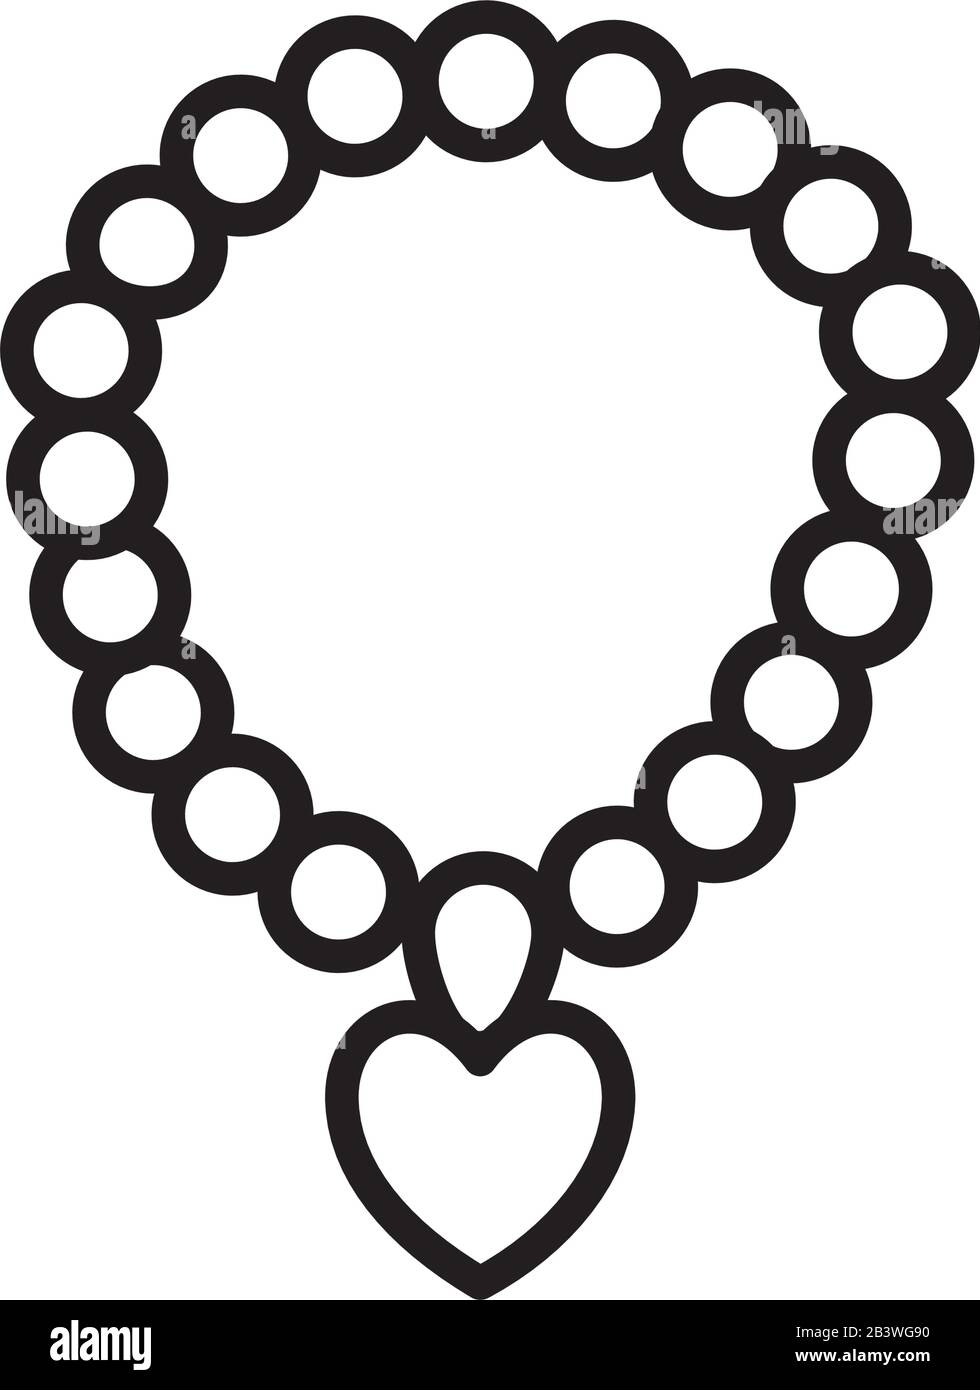 Square Outline Clipart Of A Necklace